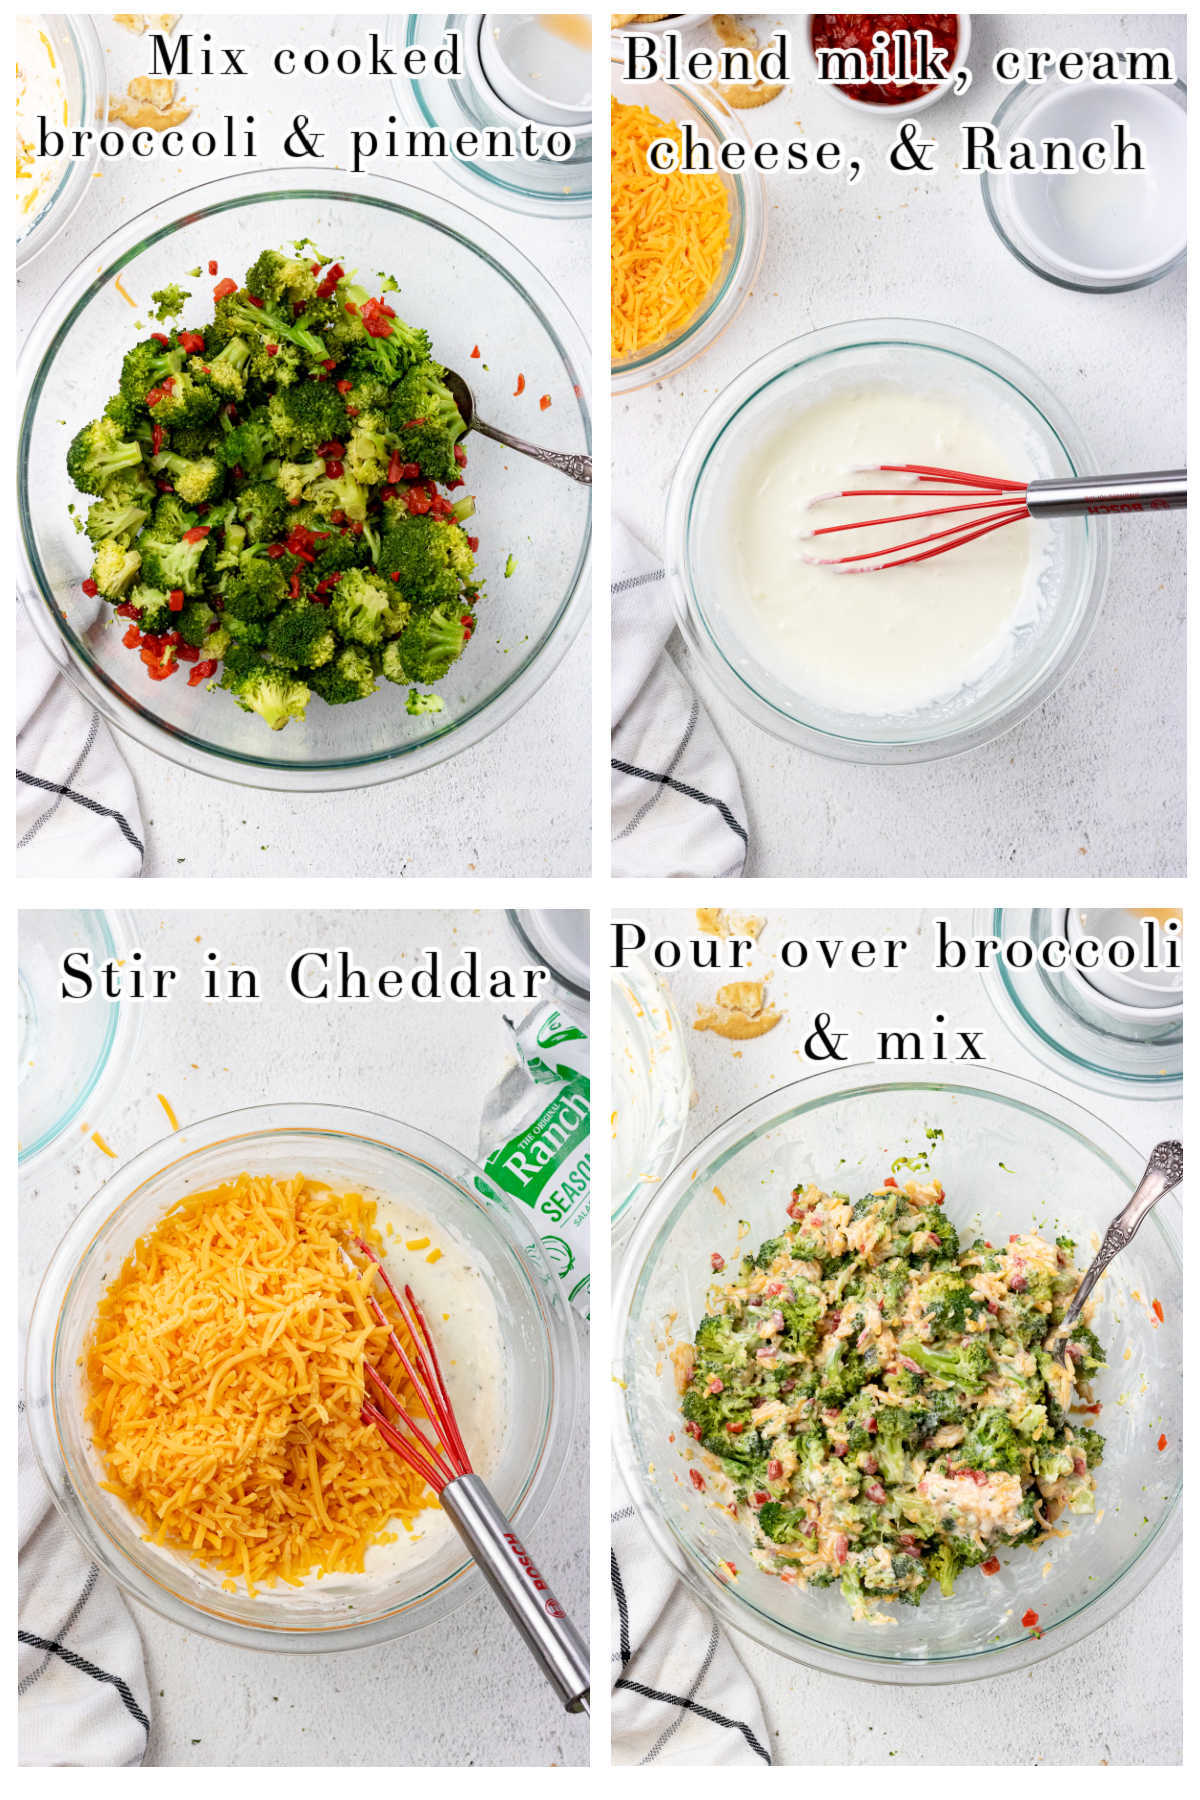 Step by step images for mixing the cheese sauce for the casserole.